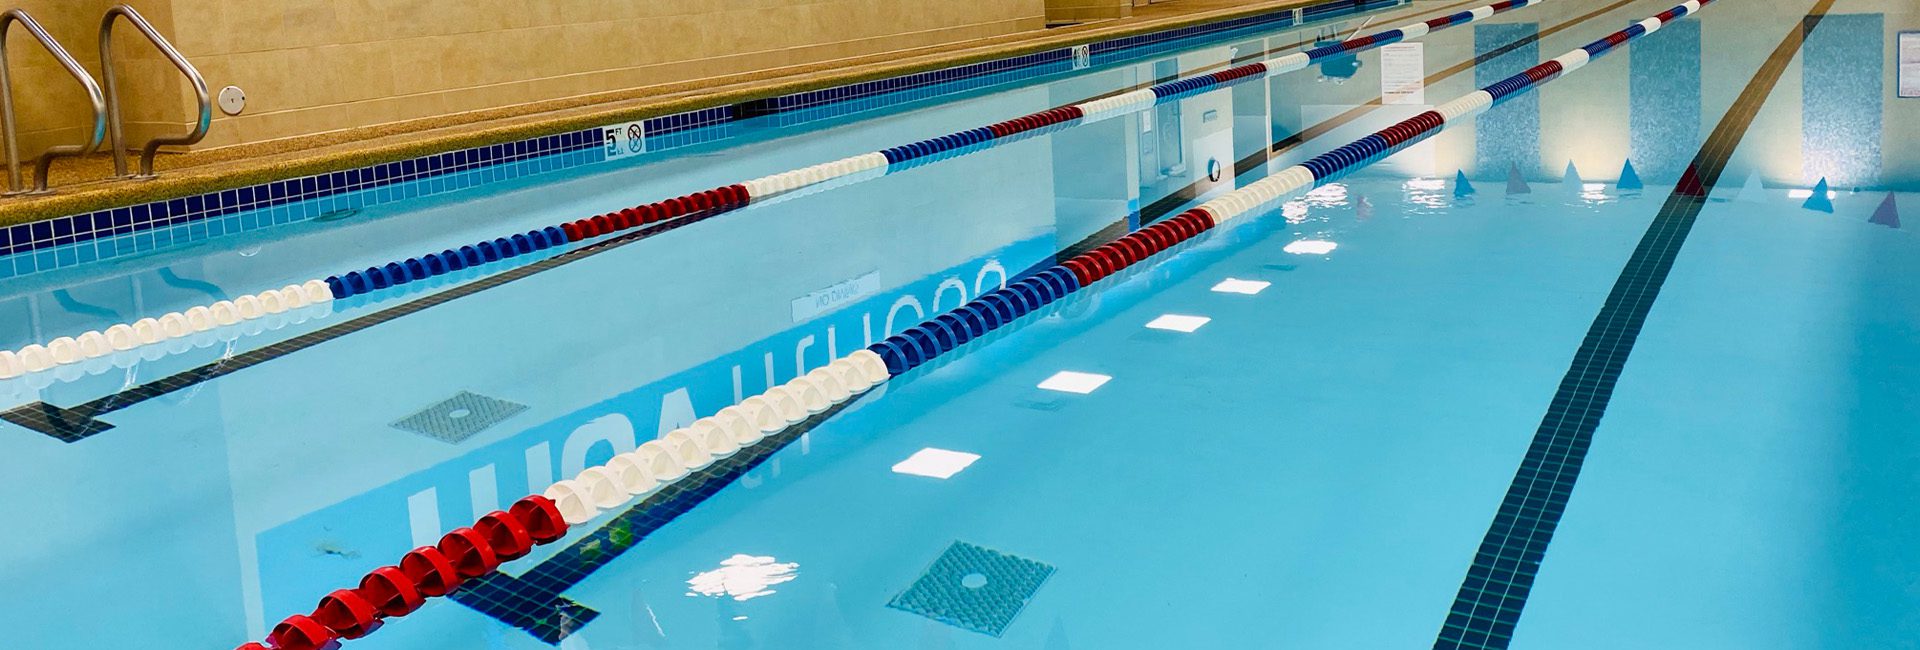 indoor pool with dividers for laps in a gym in north spokane